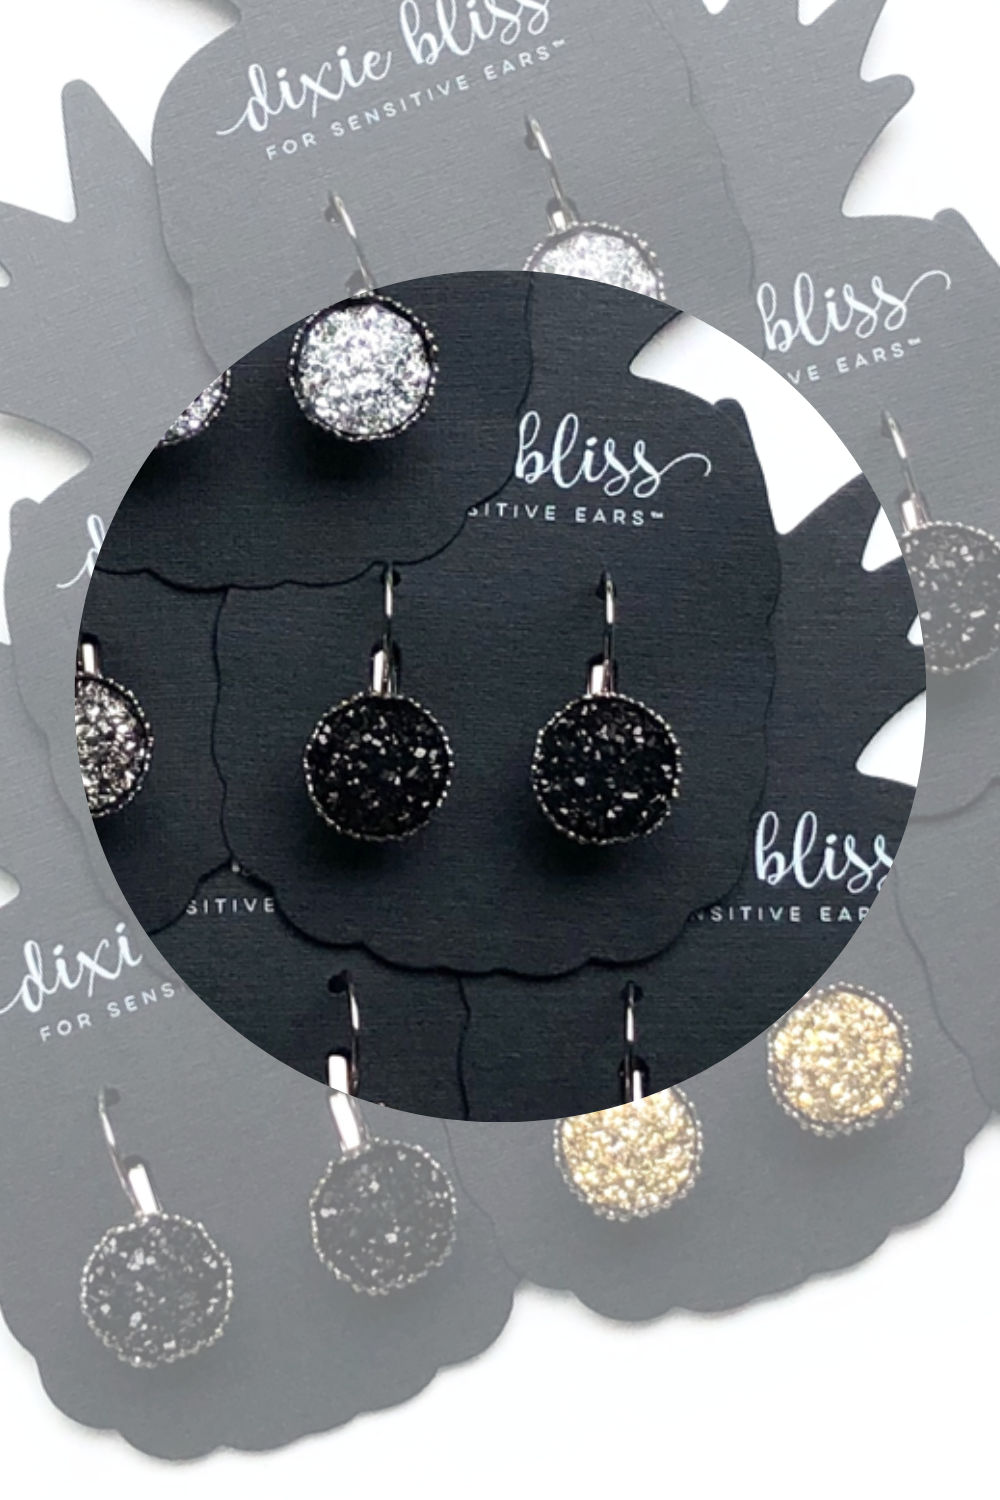 Black Druzy Sparkle Earrings by Dixie Bliss Earrings: Perfect Lever Backs In Gunmetal, Silver, Gold, Black. All are Hypoallergenic made in the USA woman-owned company druzy shiny diamond-like sparkle and shine safe & made for sensitive ears